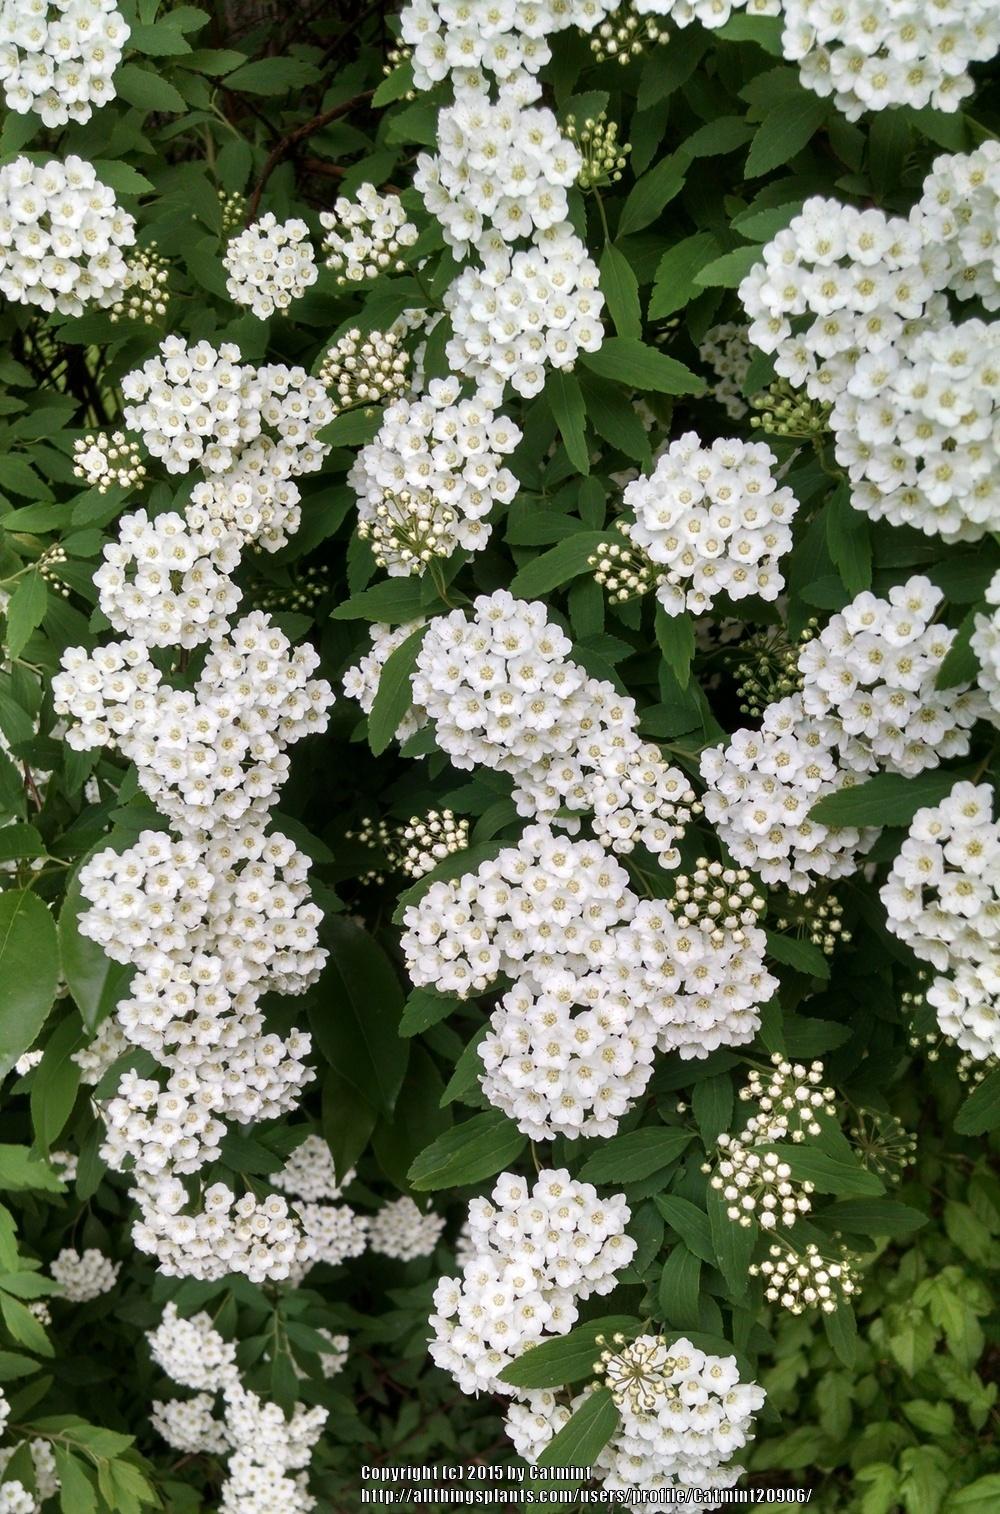 Photo of Spiraeas (Spiraea) uploaded by Catmint20906